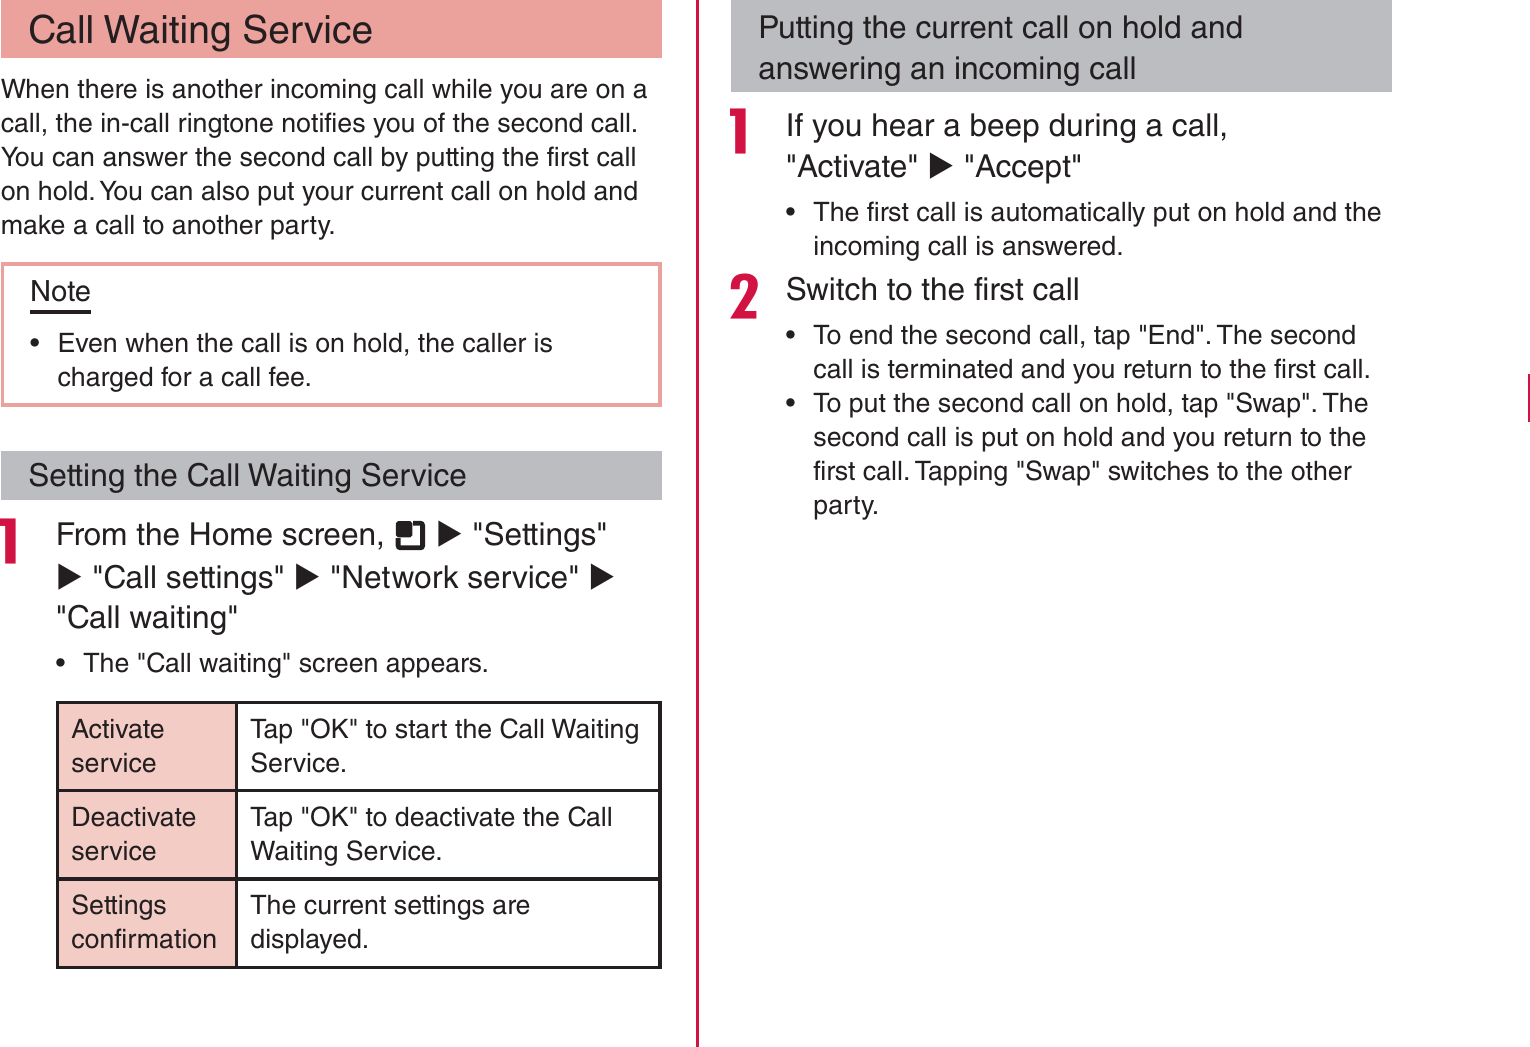 Call Waiting ServiceWhen there is another incoming call while you are on a call, the in-call ringtone notifies you of the second call. You can answer the second call by putting the first call on hold. You can also put your current call on hold and make a call to another party.Note rEven when the call is on hold, the caller is charged for a call fee.Setting the Call Waiting Service From the Home screen,   X &quot;Settings&quot; X &quot;Call settings&quot; X &quot;Network service&quot; X &quot;Call waiting&quot; rThe &quot;Call waiting&quot; screen appears. Activate serviceTap &quot;OK&quot; to start the Call Waiting Service.Deactivate serviceTap &quot;OK&quot; to deactivate the Call Waiting Service.Settings confirmationThe current settings are displayed.Putting the current call on hold and answering an incoming call If you hear a beep during a call, &quot;Activate&quot; X &quot;Accept&quot; rThe first call is automatically put on hold and the incoming call is answered.Switch to the first call rTo end the second call, tap &quot;End&quot;. The second call is terminated and you return to the first call. rTo put the second call on hold, tap &quot;Swap&quot;. The second call is put on hold and you return to the first call. Tapping &quot;Swap&quot; switches to the other party.95Calling / Network Services